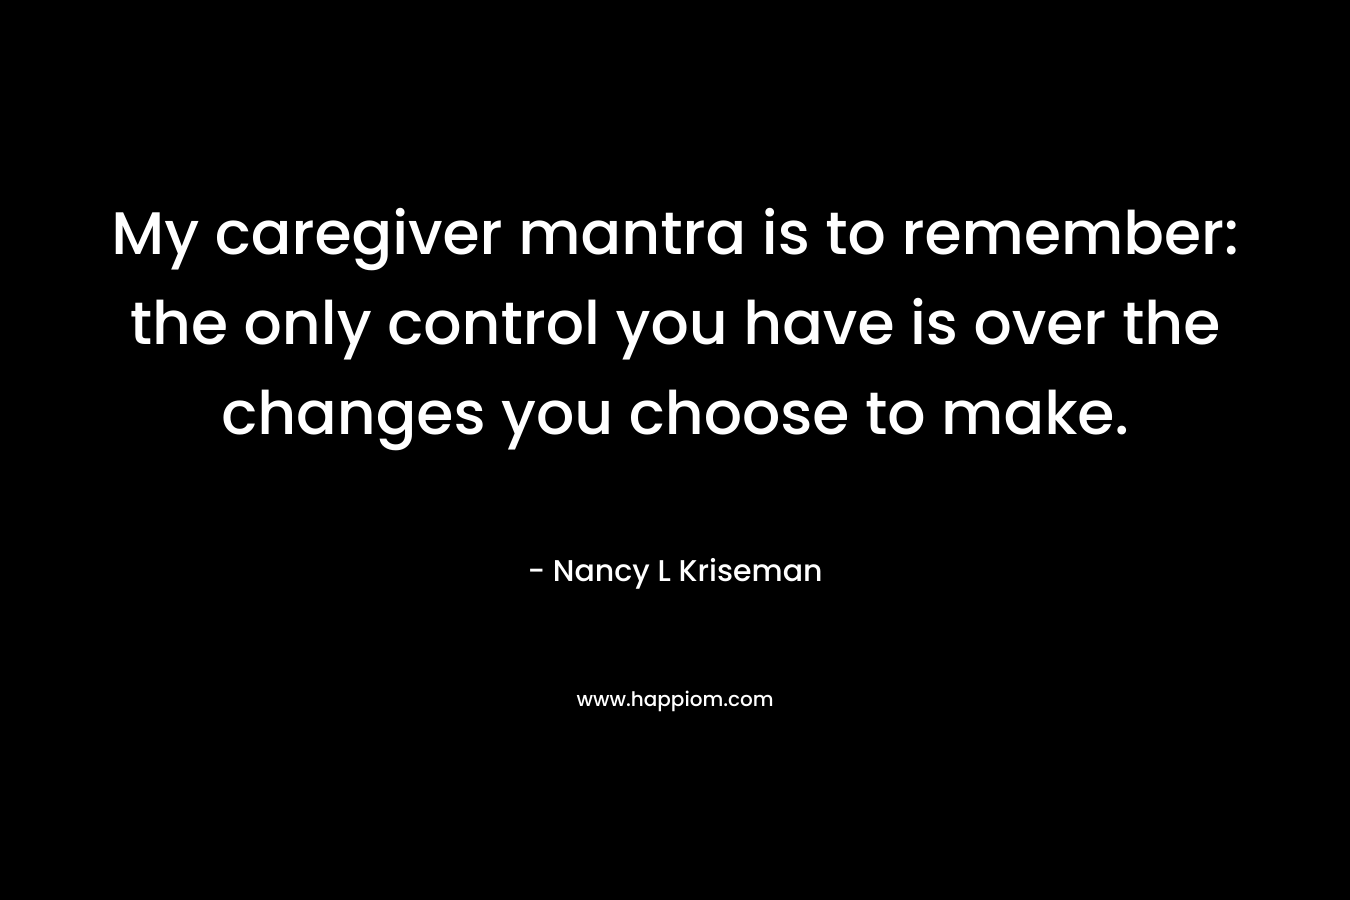 My caregiver mantra is to remember: the only control you have is over the changes you choose to make. – Nancy L Kriseman